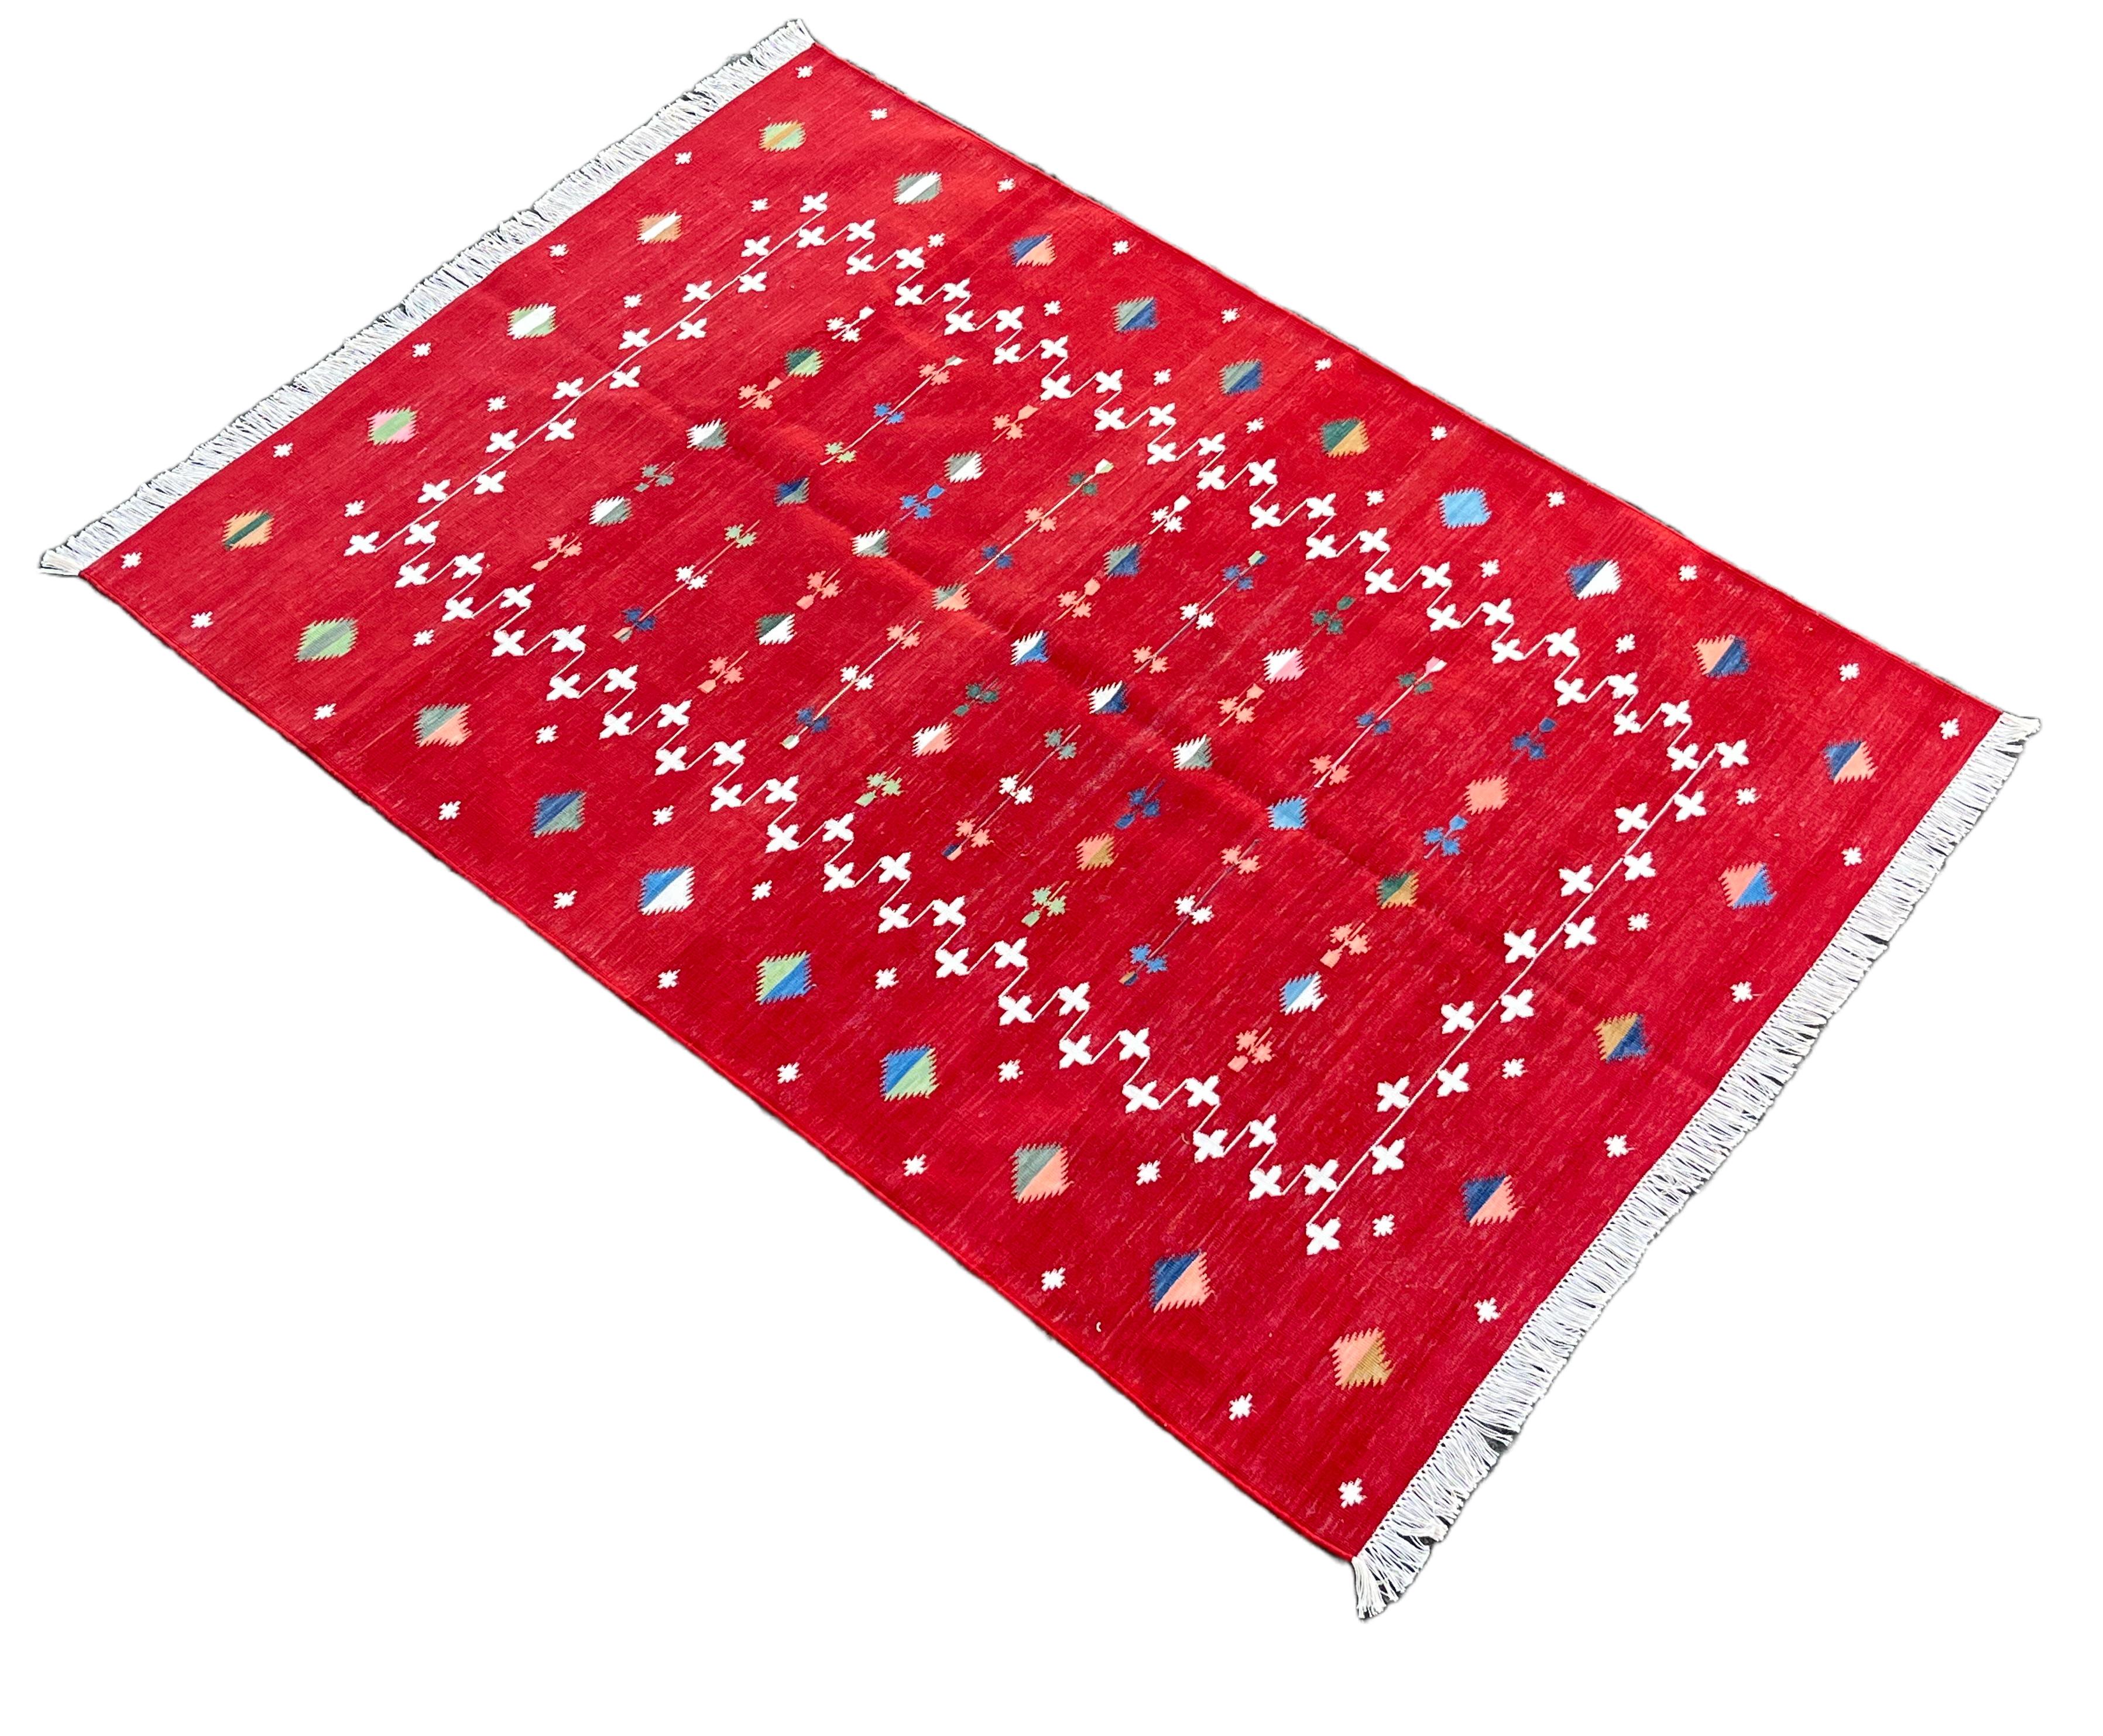 Cotton Vegetable Dyed Reversible Red And White Indian Shooting Star Rug - 4'x6'
These special flat-weave dhurries are hand-woven with 15 ply 100% cotton yarn. Due to the special manufacturing techniques used to create our rugs, the size and color of